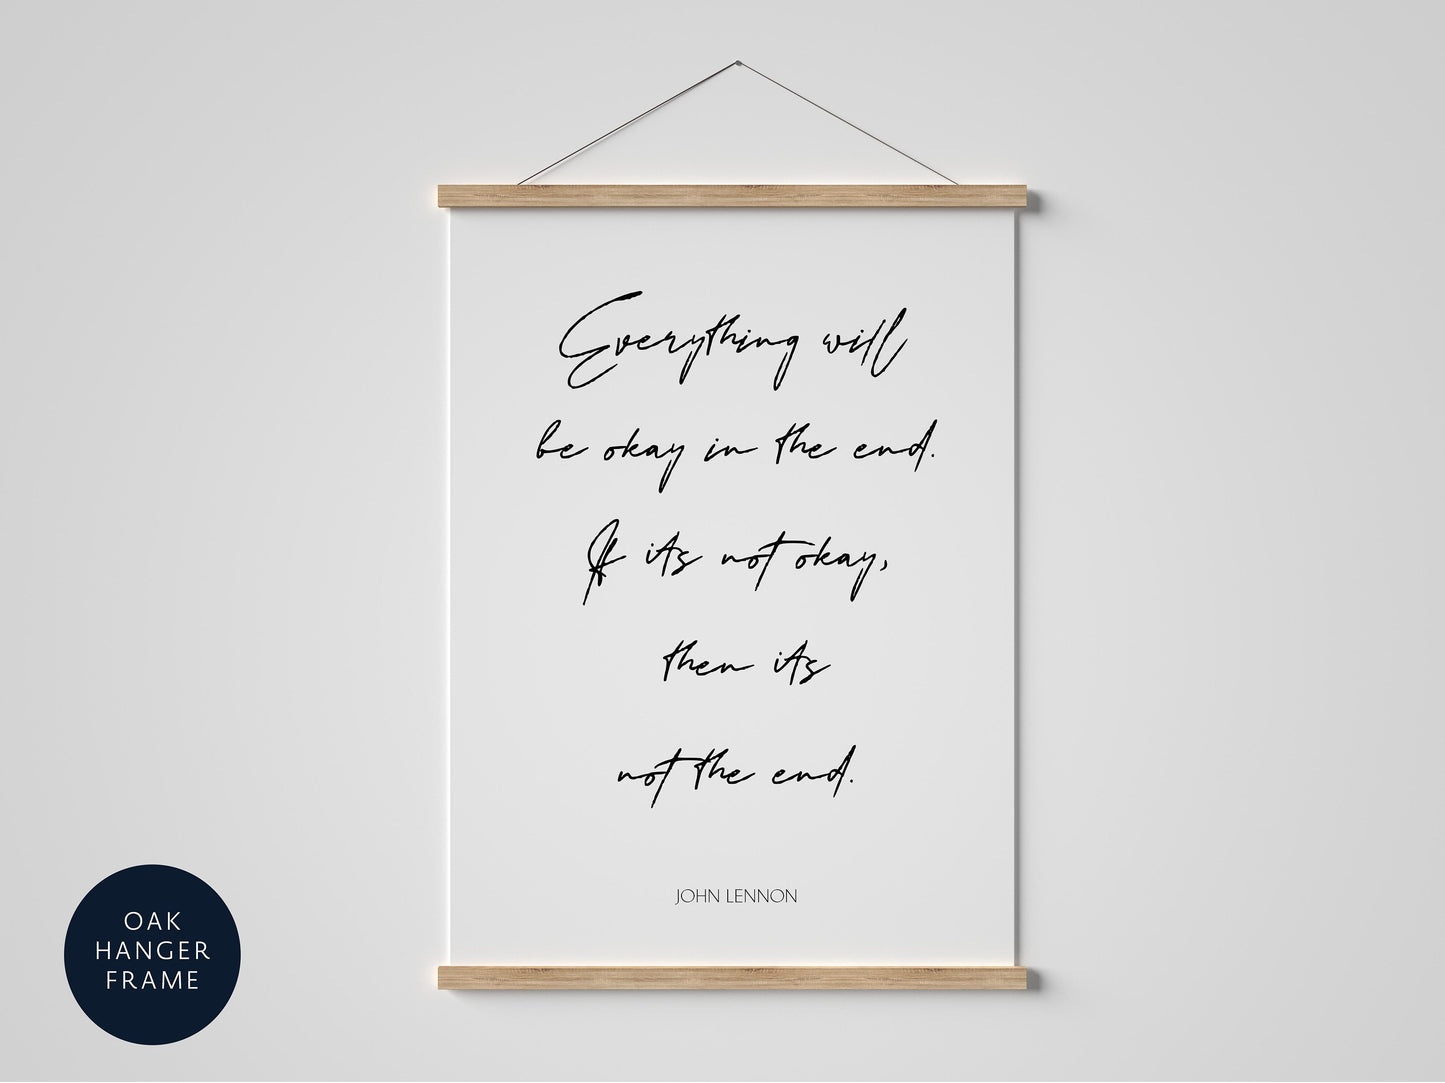 everything will be okay in the end framed print by john lennon, the beatles